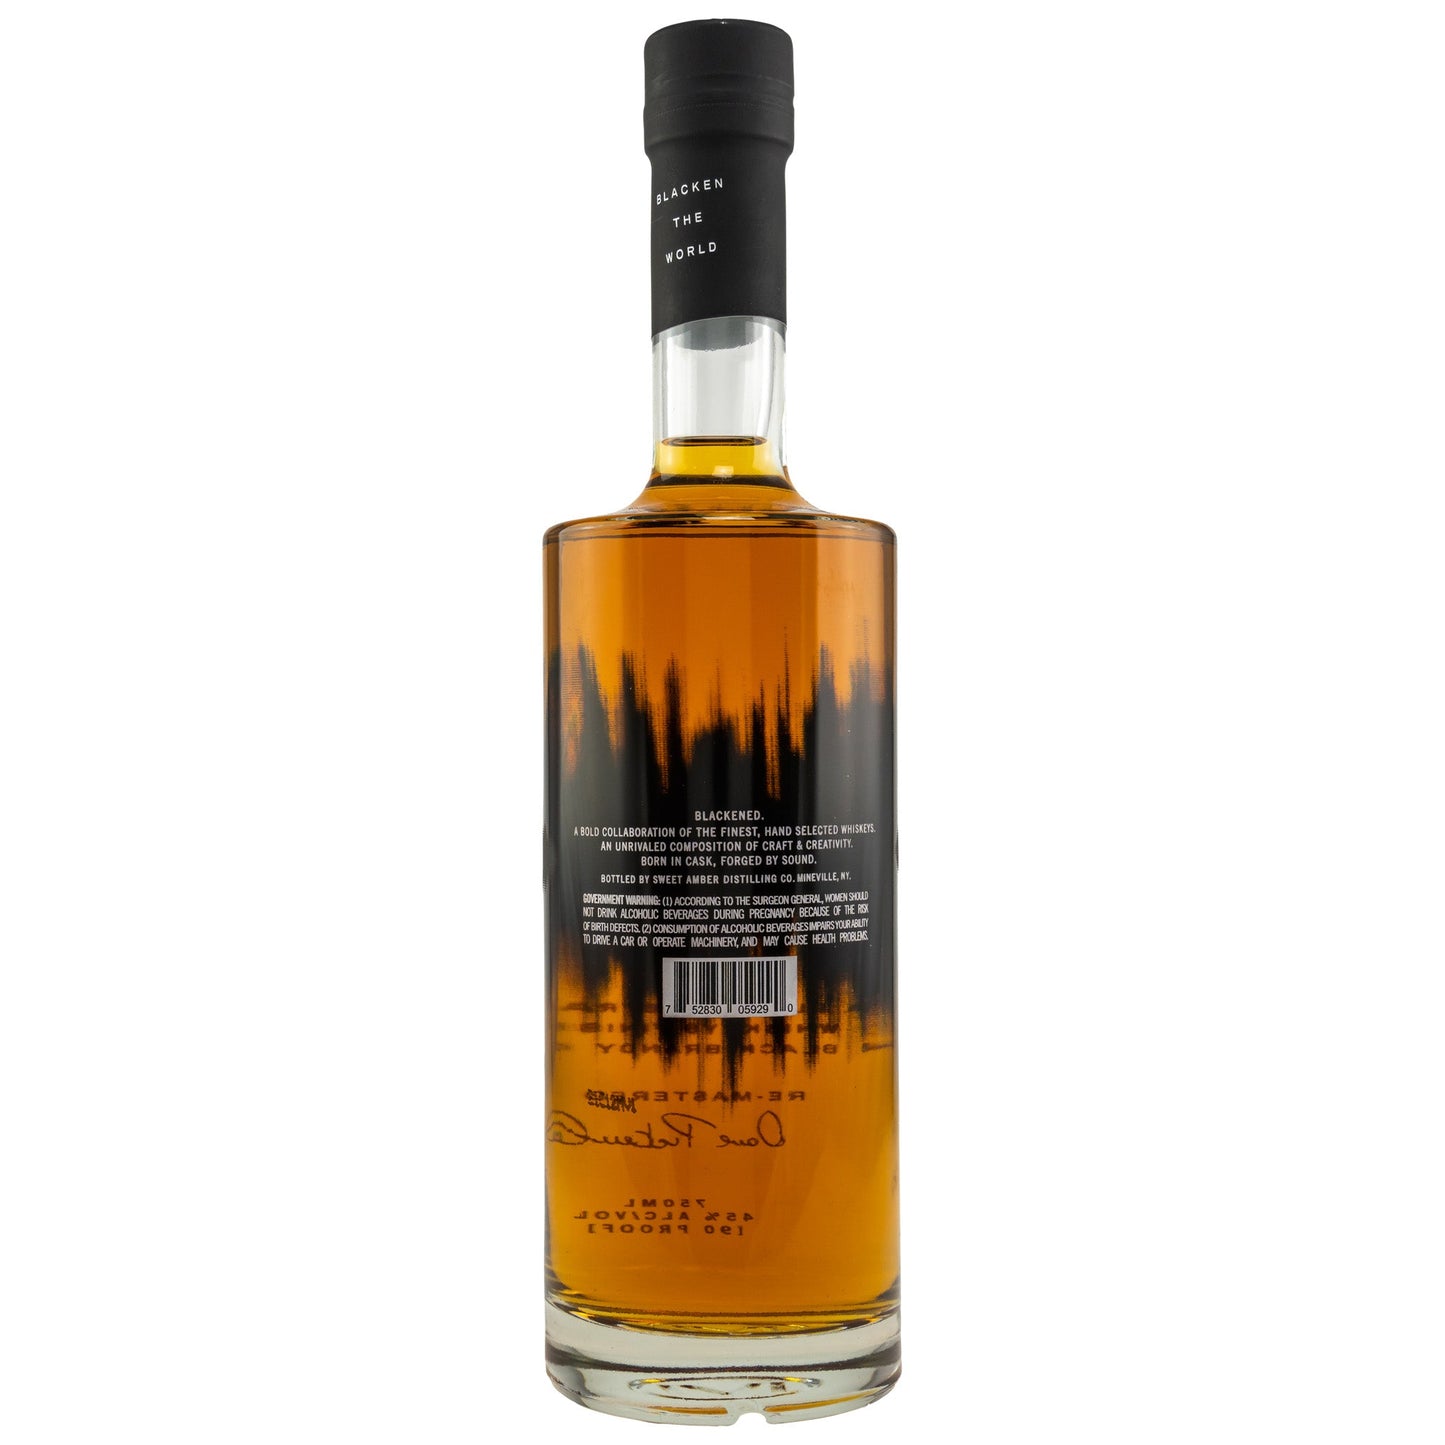 Blackened | American Whiskey by Metallica | Blended Whiskey | 0,75l | 45%GET A BOTTLE